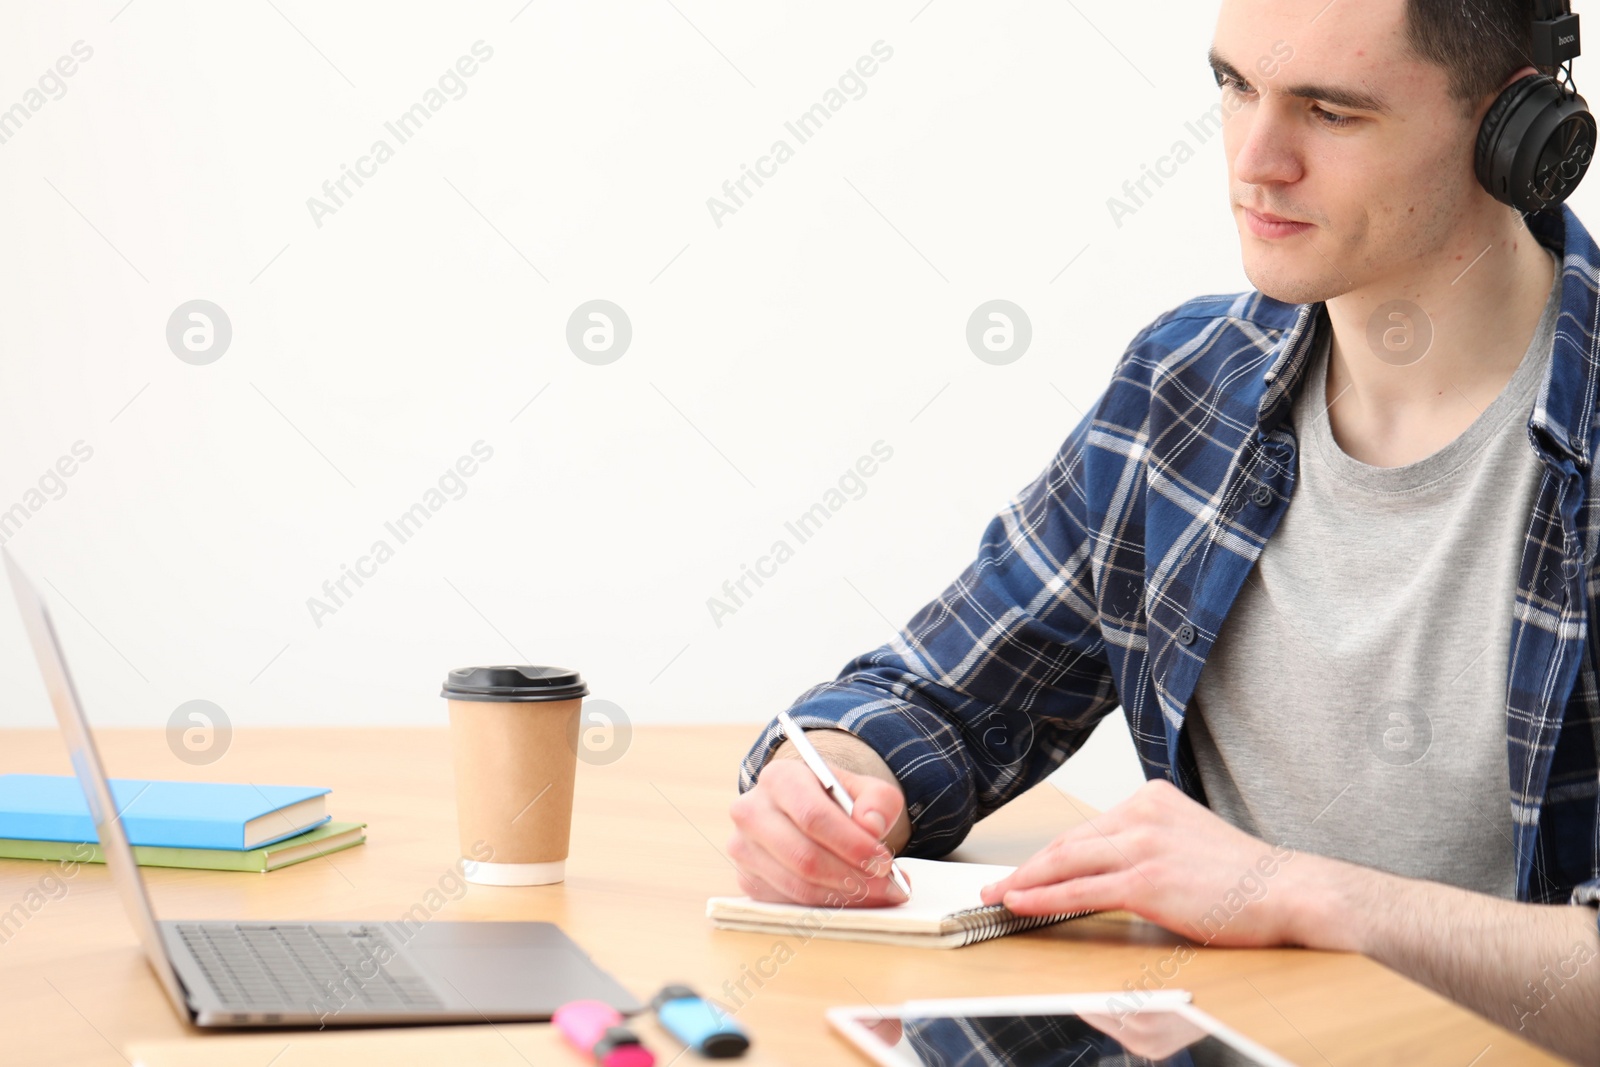 Photo of E-learning. Young man taking notes during online lesson at table indoors.